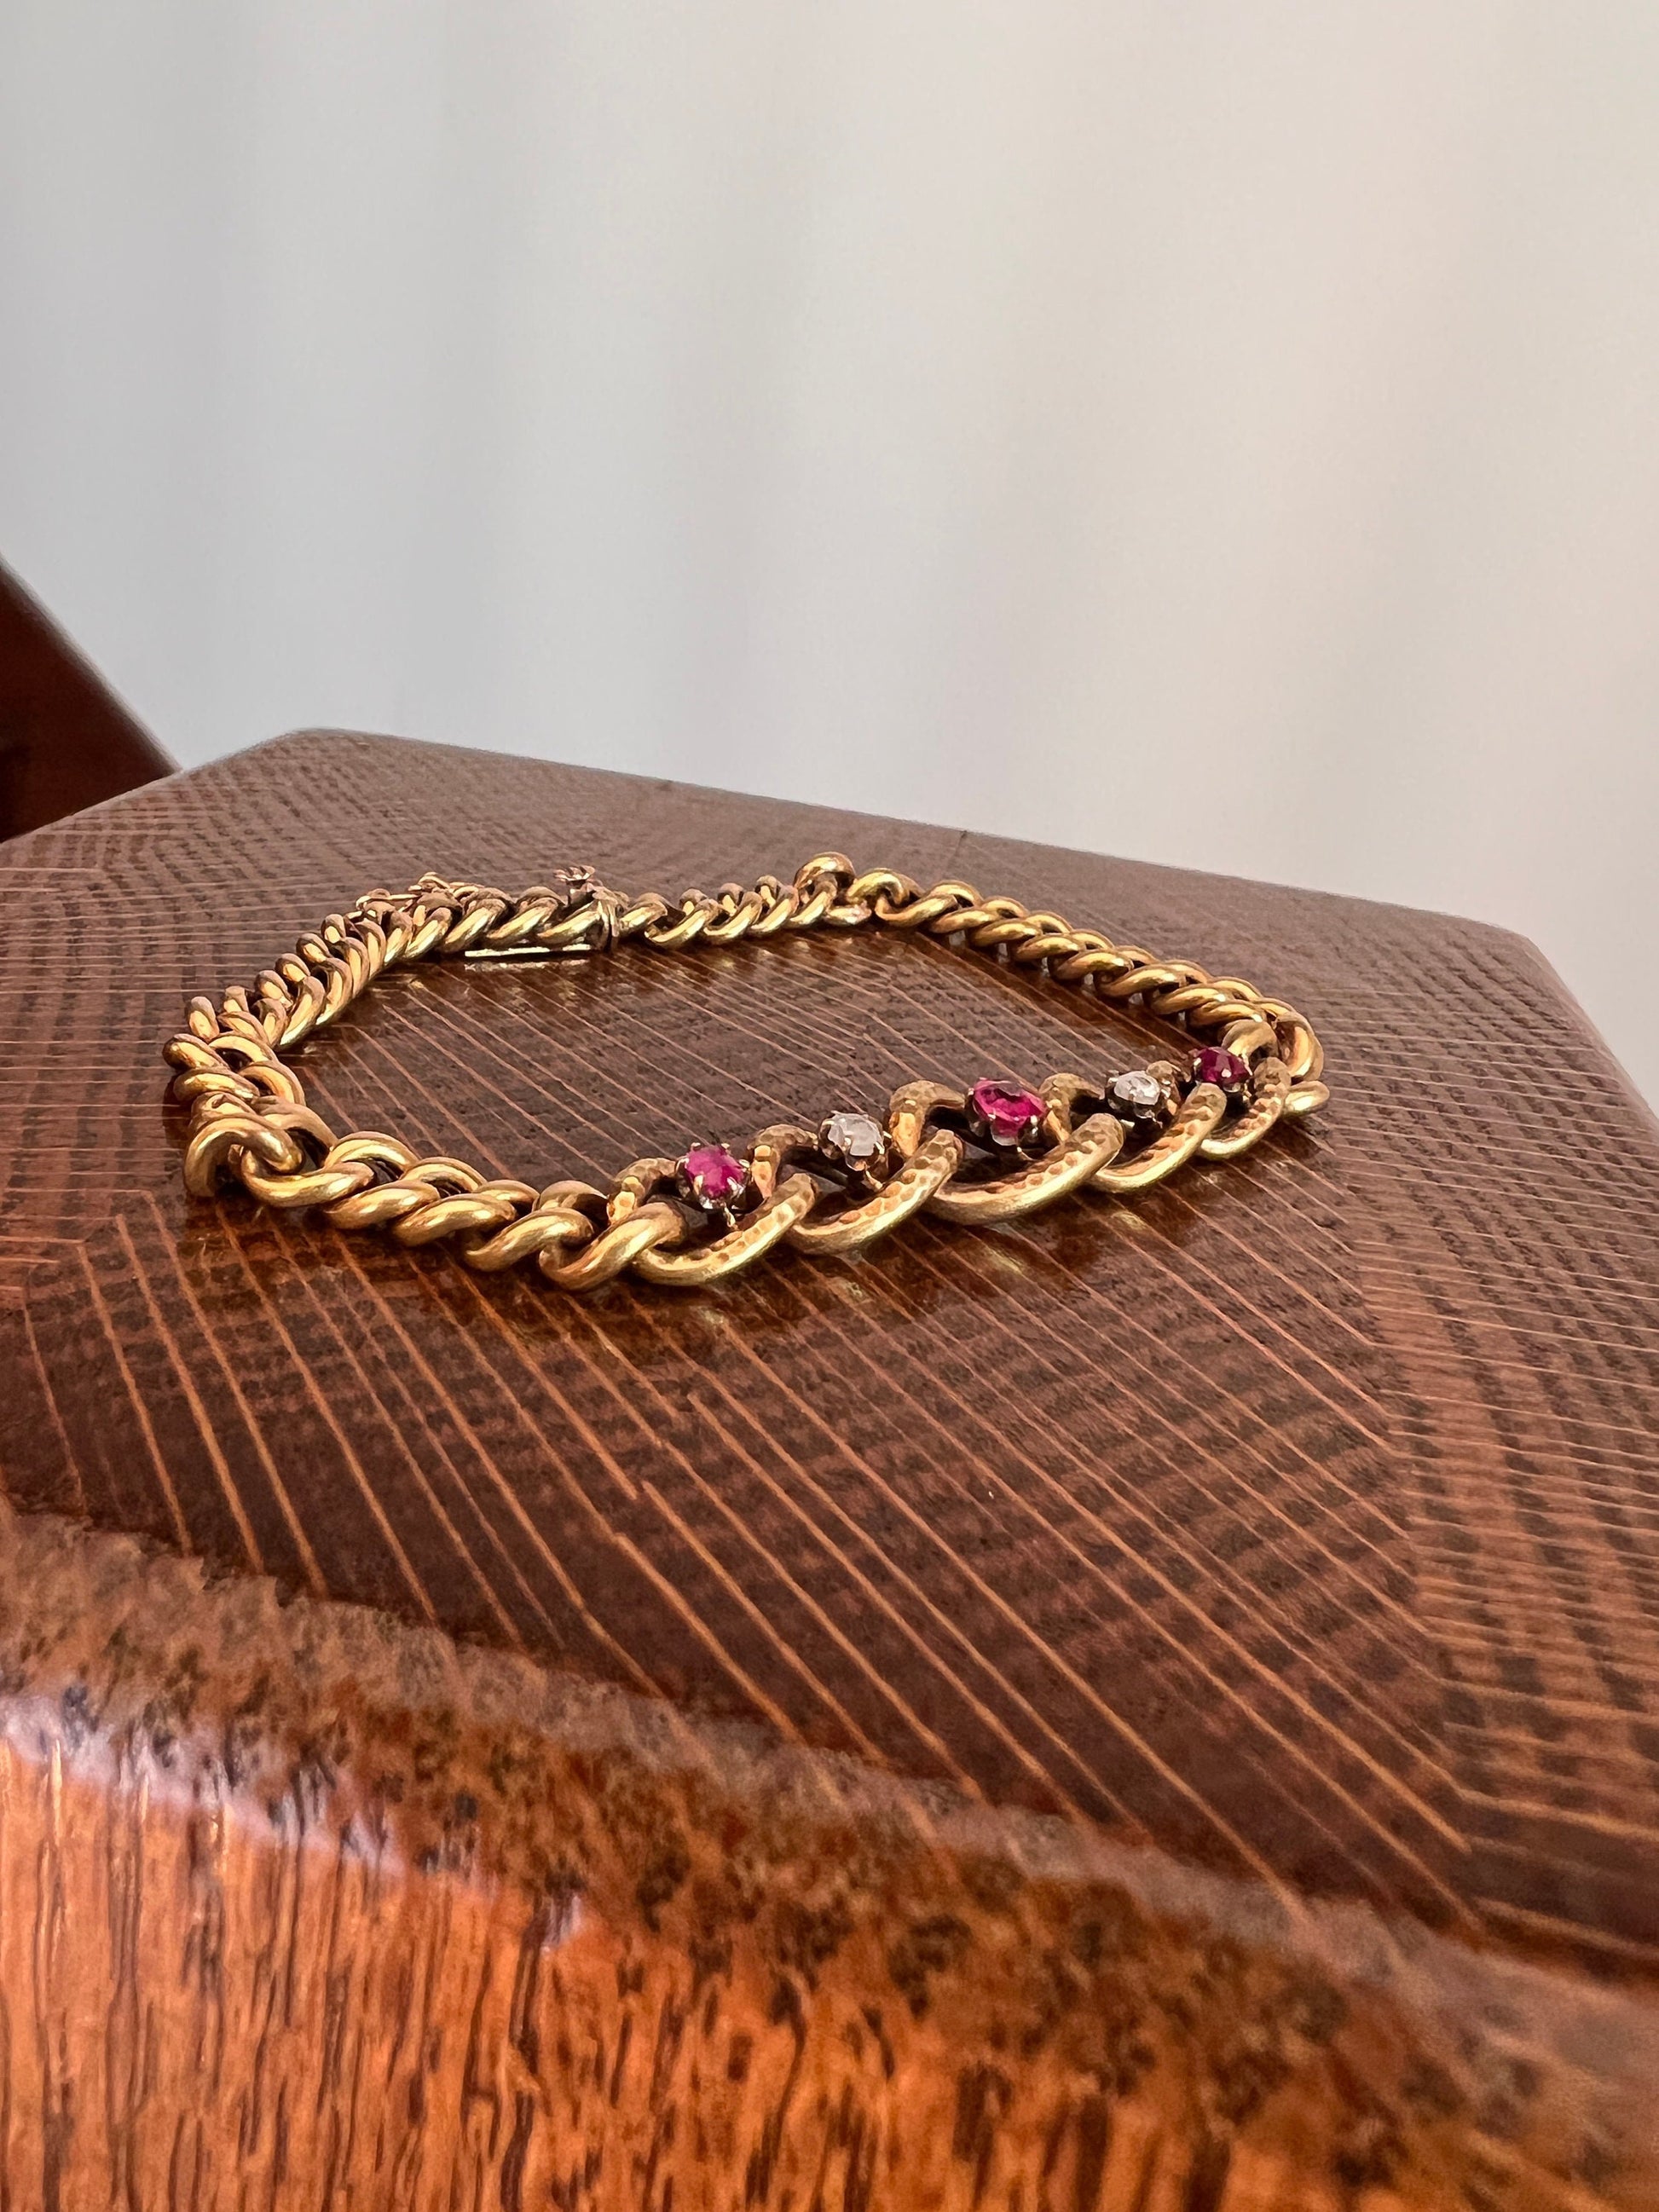 RUBY Rose Cut DIAMOND Five Stone French ANTiQUE 18k GOLD Hammered Curb Link Bracelet ViCTORIAN Belle Epoque Wriststack Gift Art Nouveau Red